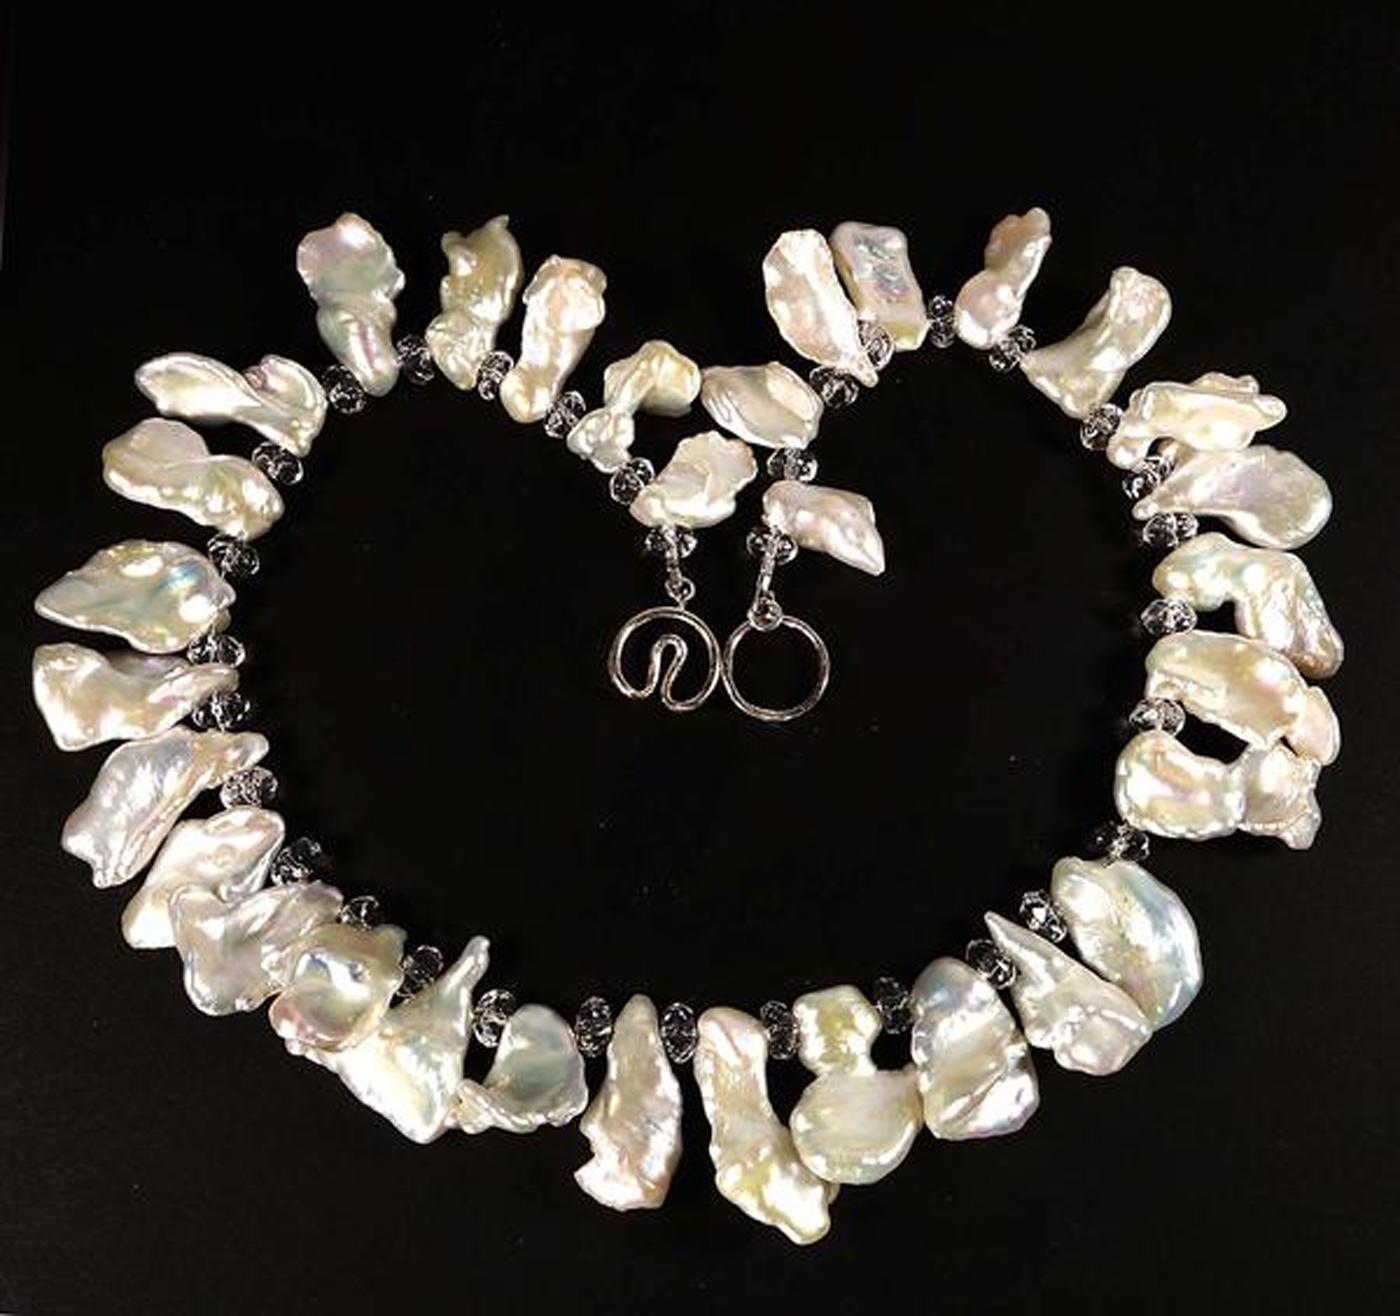 Necklace of White Iridescent free form Pearls and faceted clear Quartz crystal rondelles.  The Pearls are gently graduated from 17 x 9 mm to 23 x 12 mm.  This 14.5 inch choker necklace is secured with a Sterling Silver clasp.  More from this jeweler